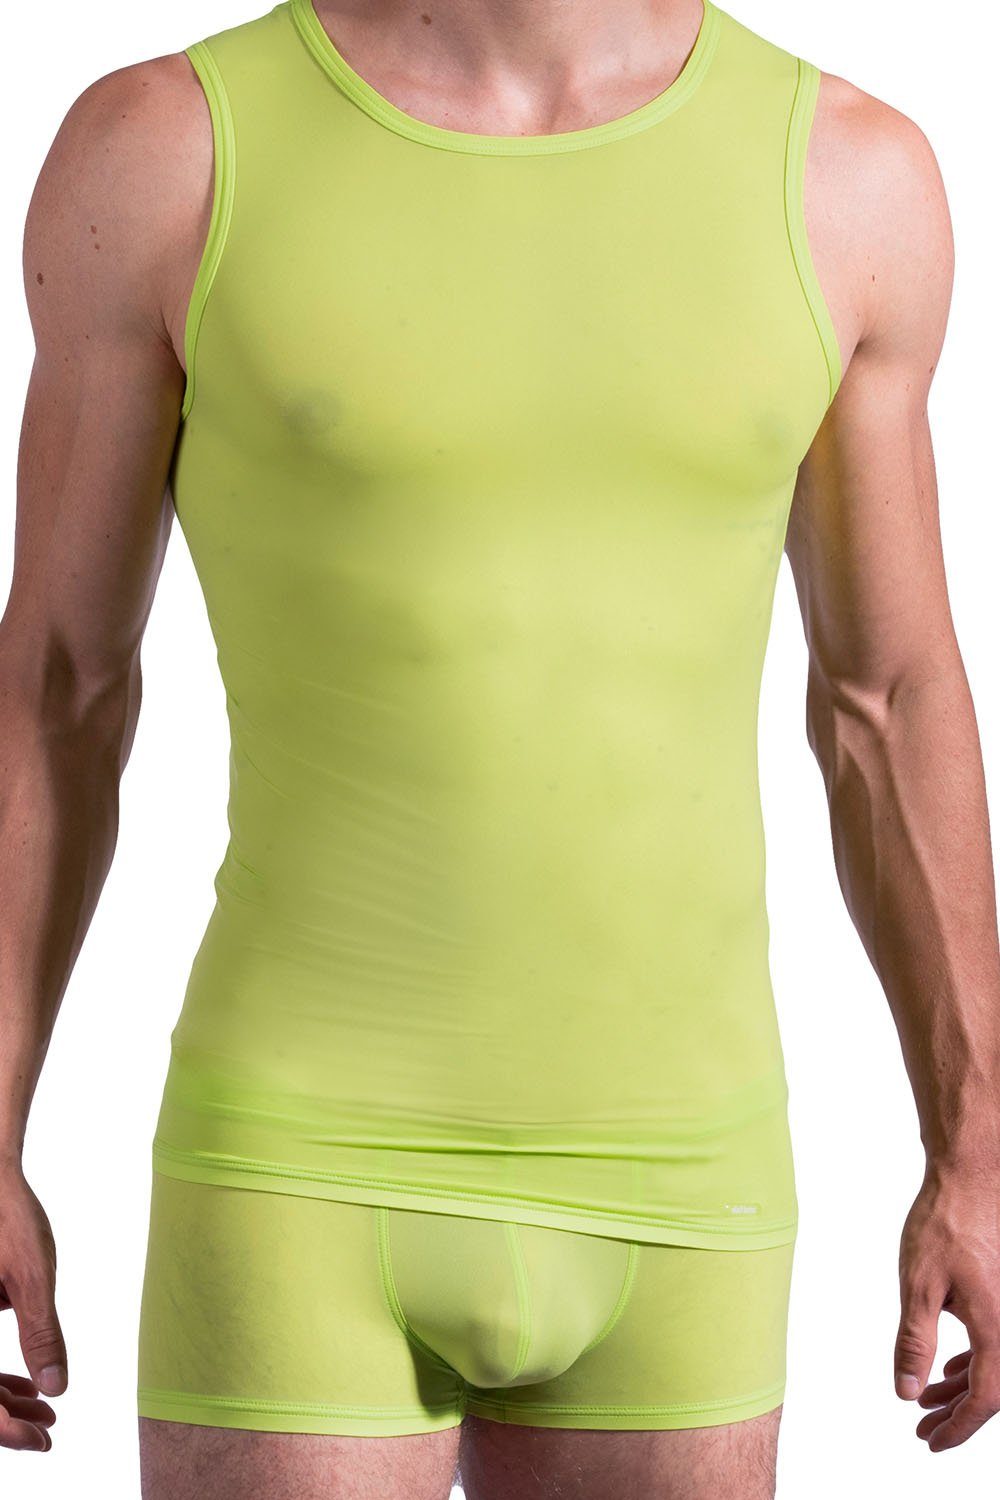 Olaf Benz Muskelshirt Tanktop 106025 lime green